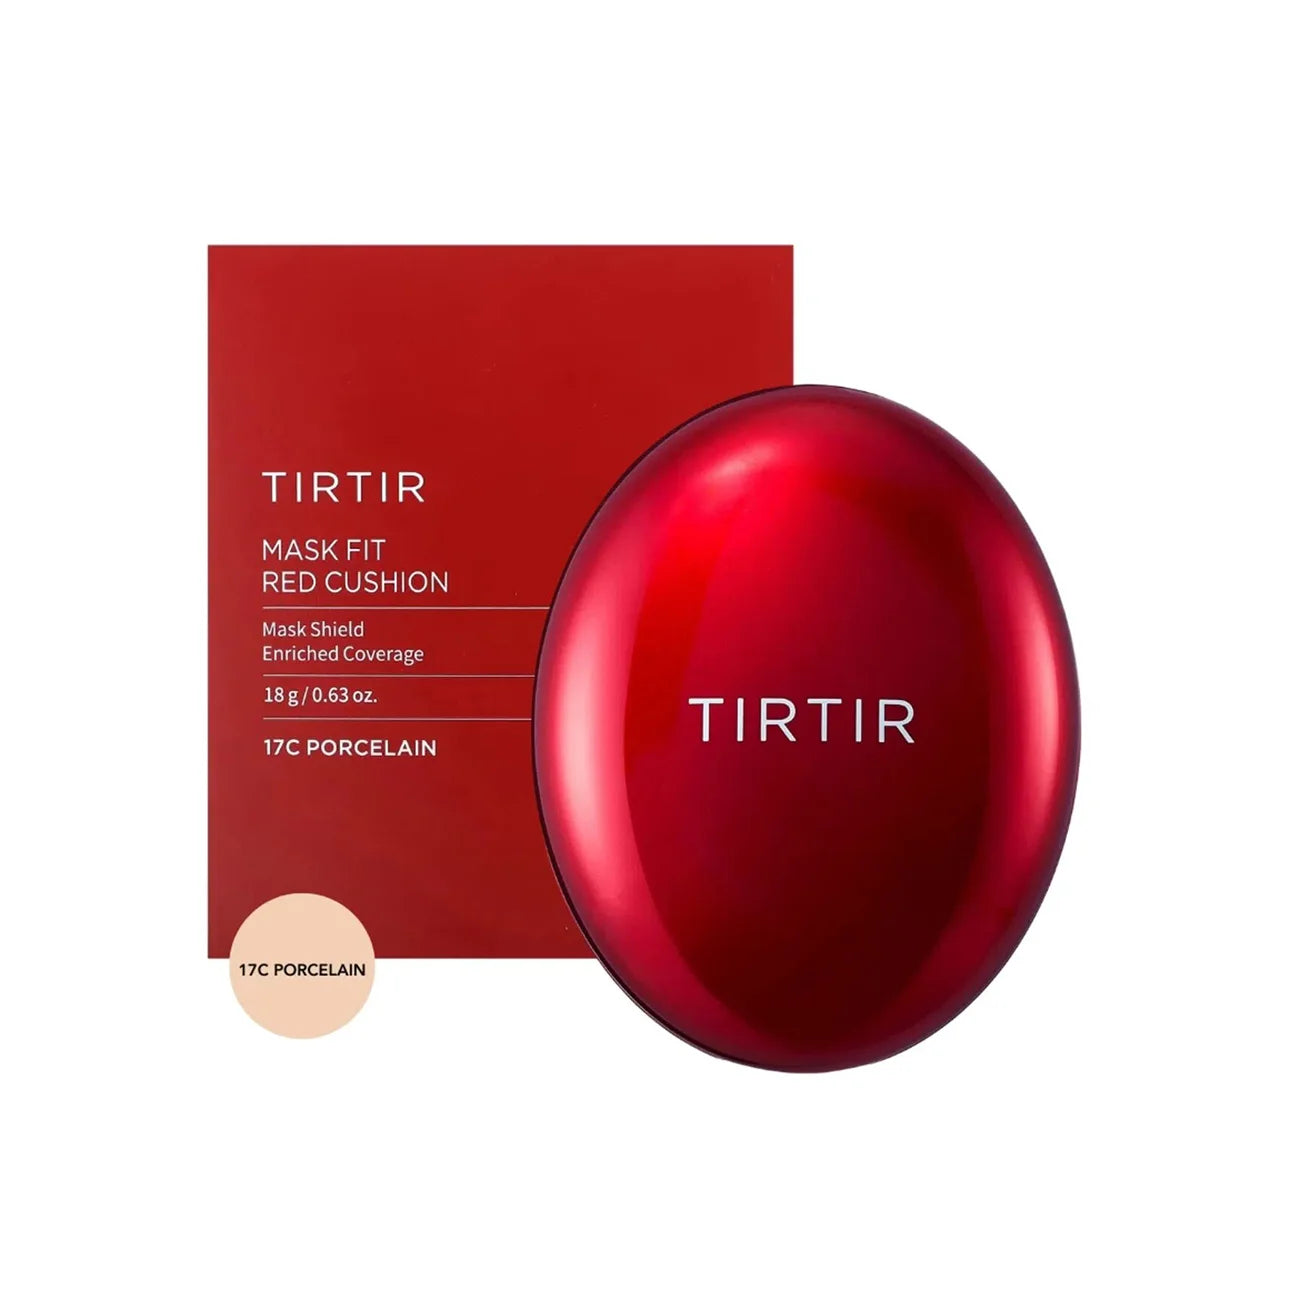 TIRTIR Mask Fit Red Cushion 17C Porcelain top rated Korean cosmetics foundation makeup flawless semi matter finish SPF sun protection K Beauty World